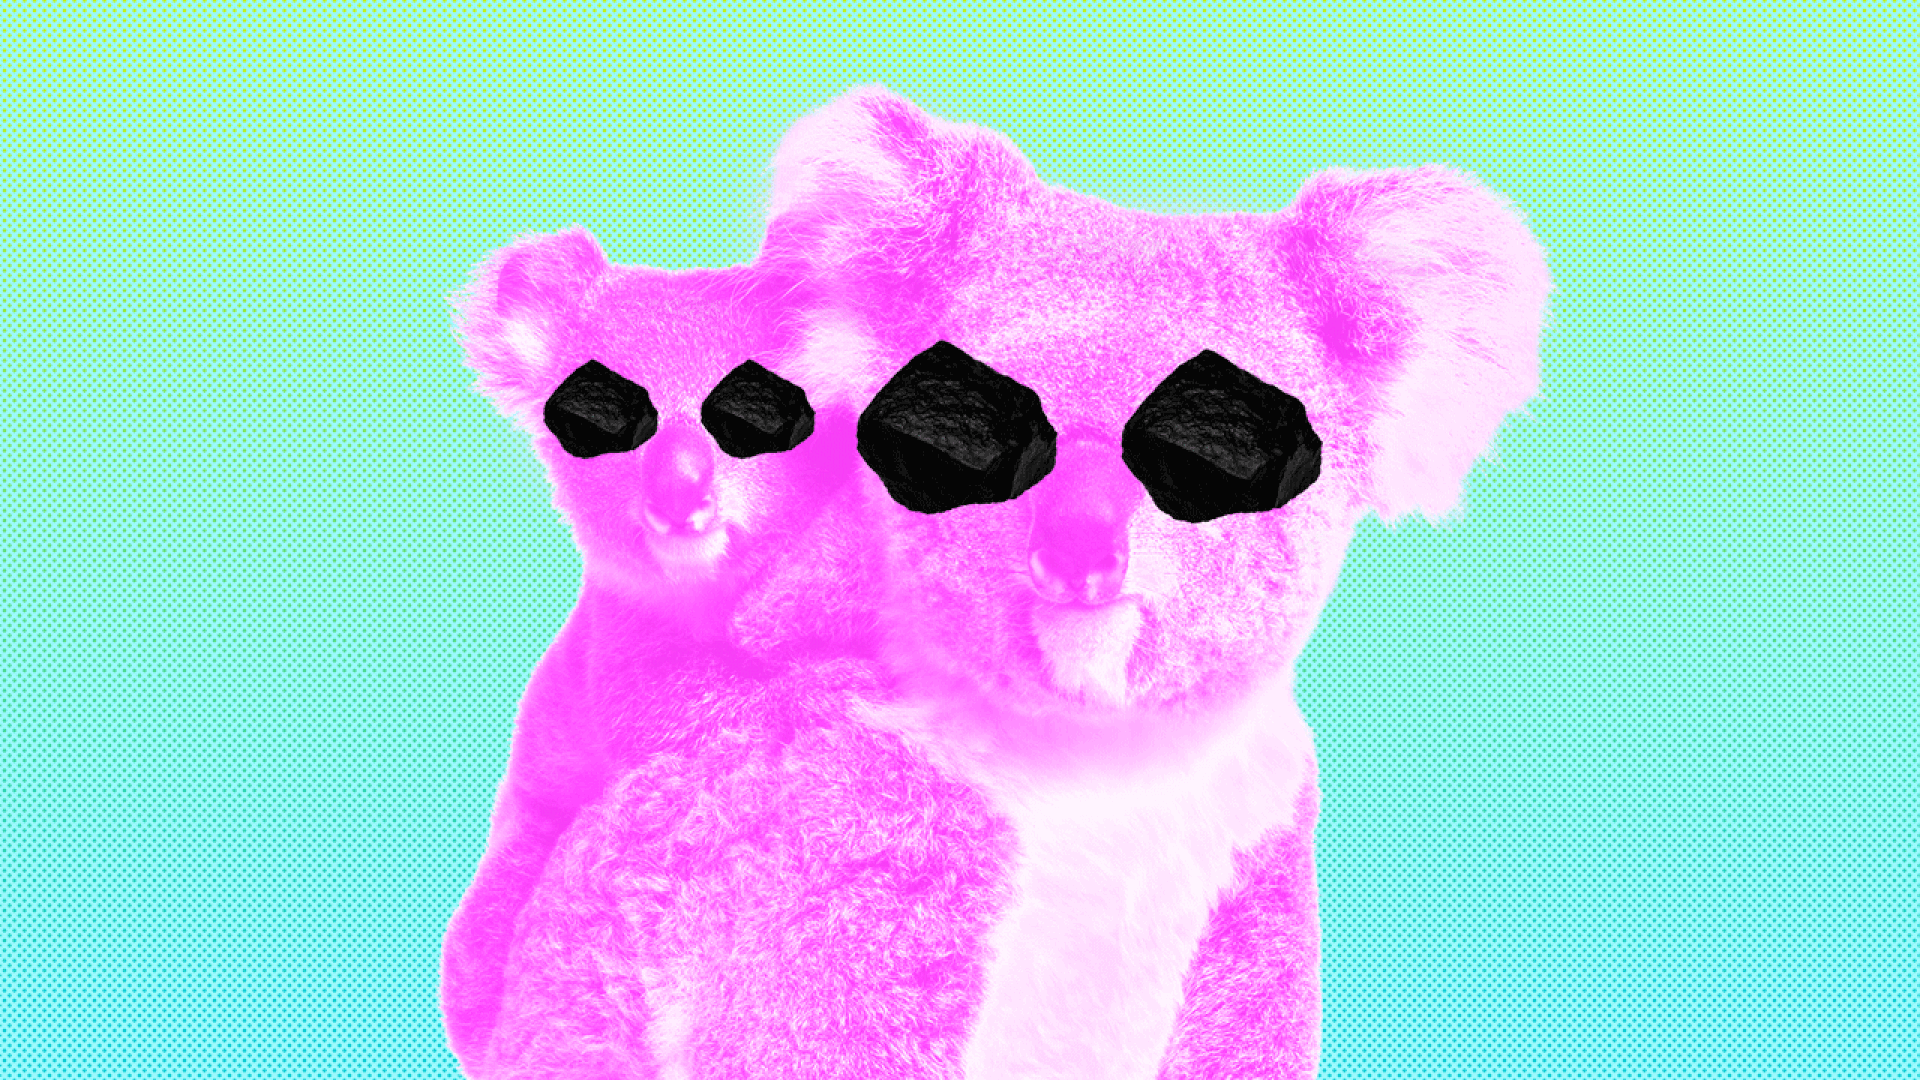 illustration of neon koalas with spinning lumps of coal for eyes